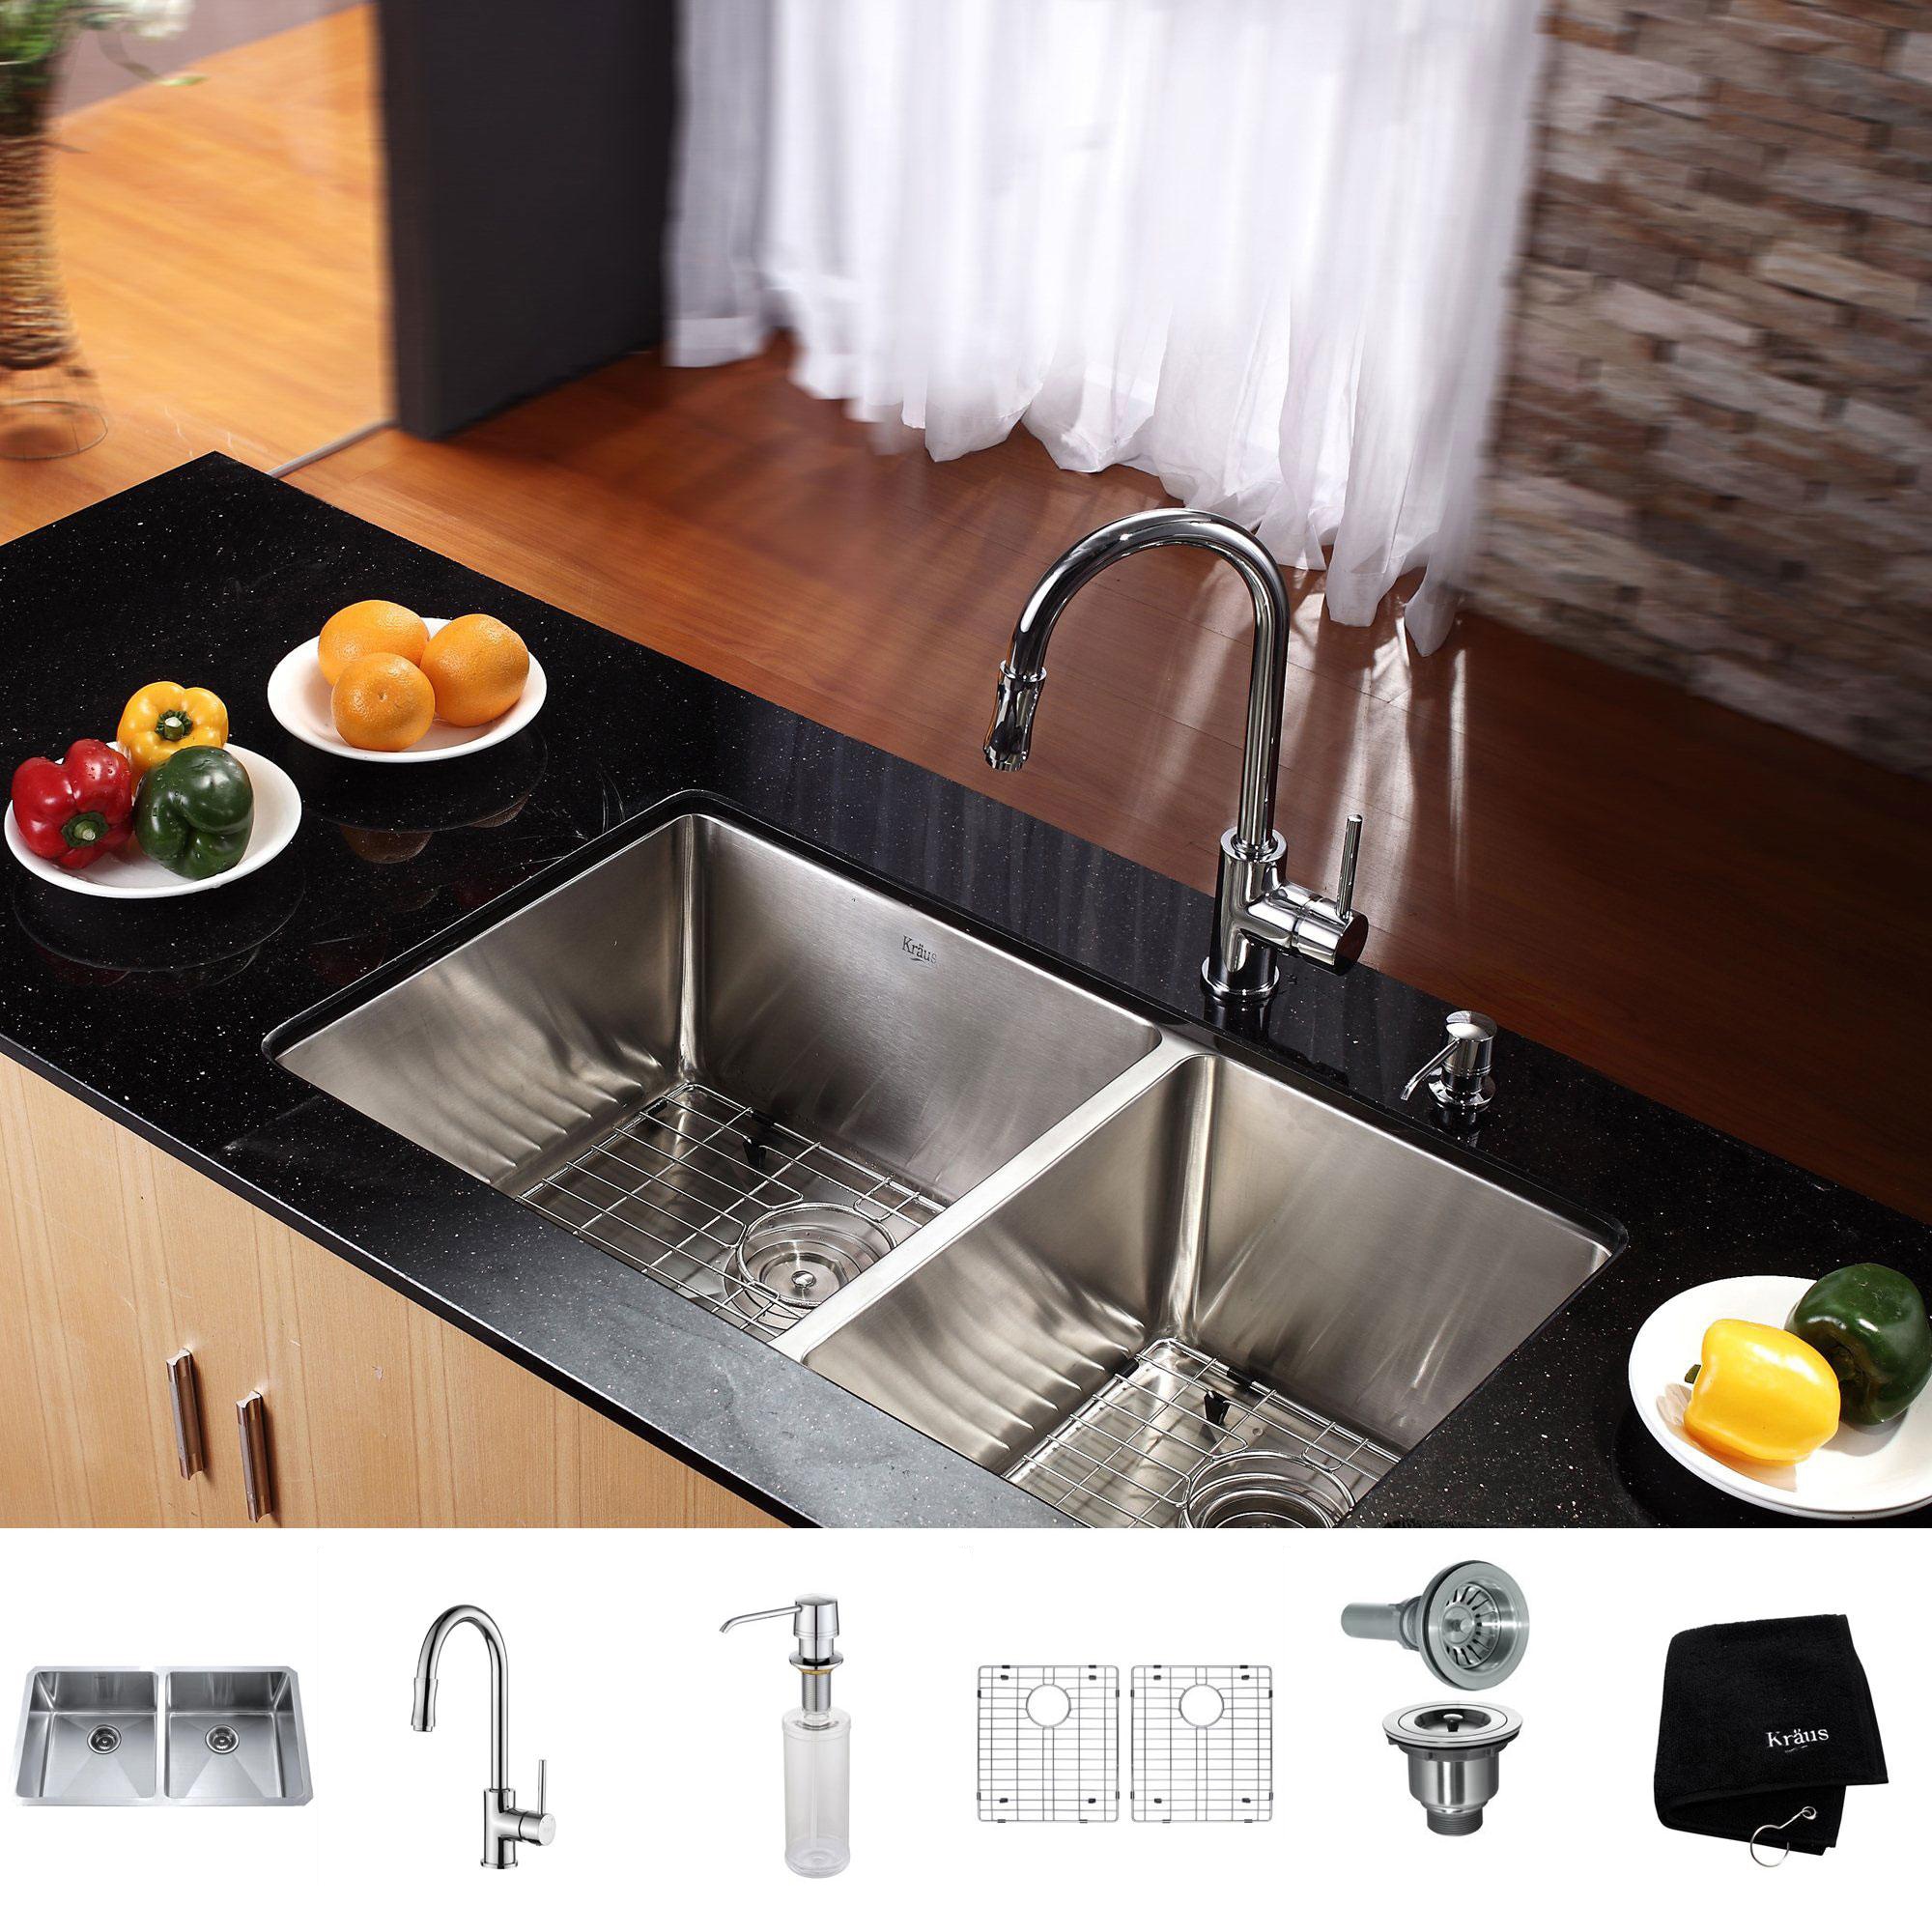 KRAUS 33 Inch Undermount Double Bowl Stainless Steel Kitchen Sink with  Kitchen Bar Faucet and Soap Dispenser - Bed Bath & Beyond - 4389944